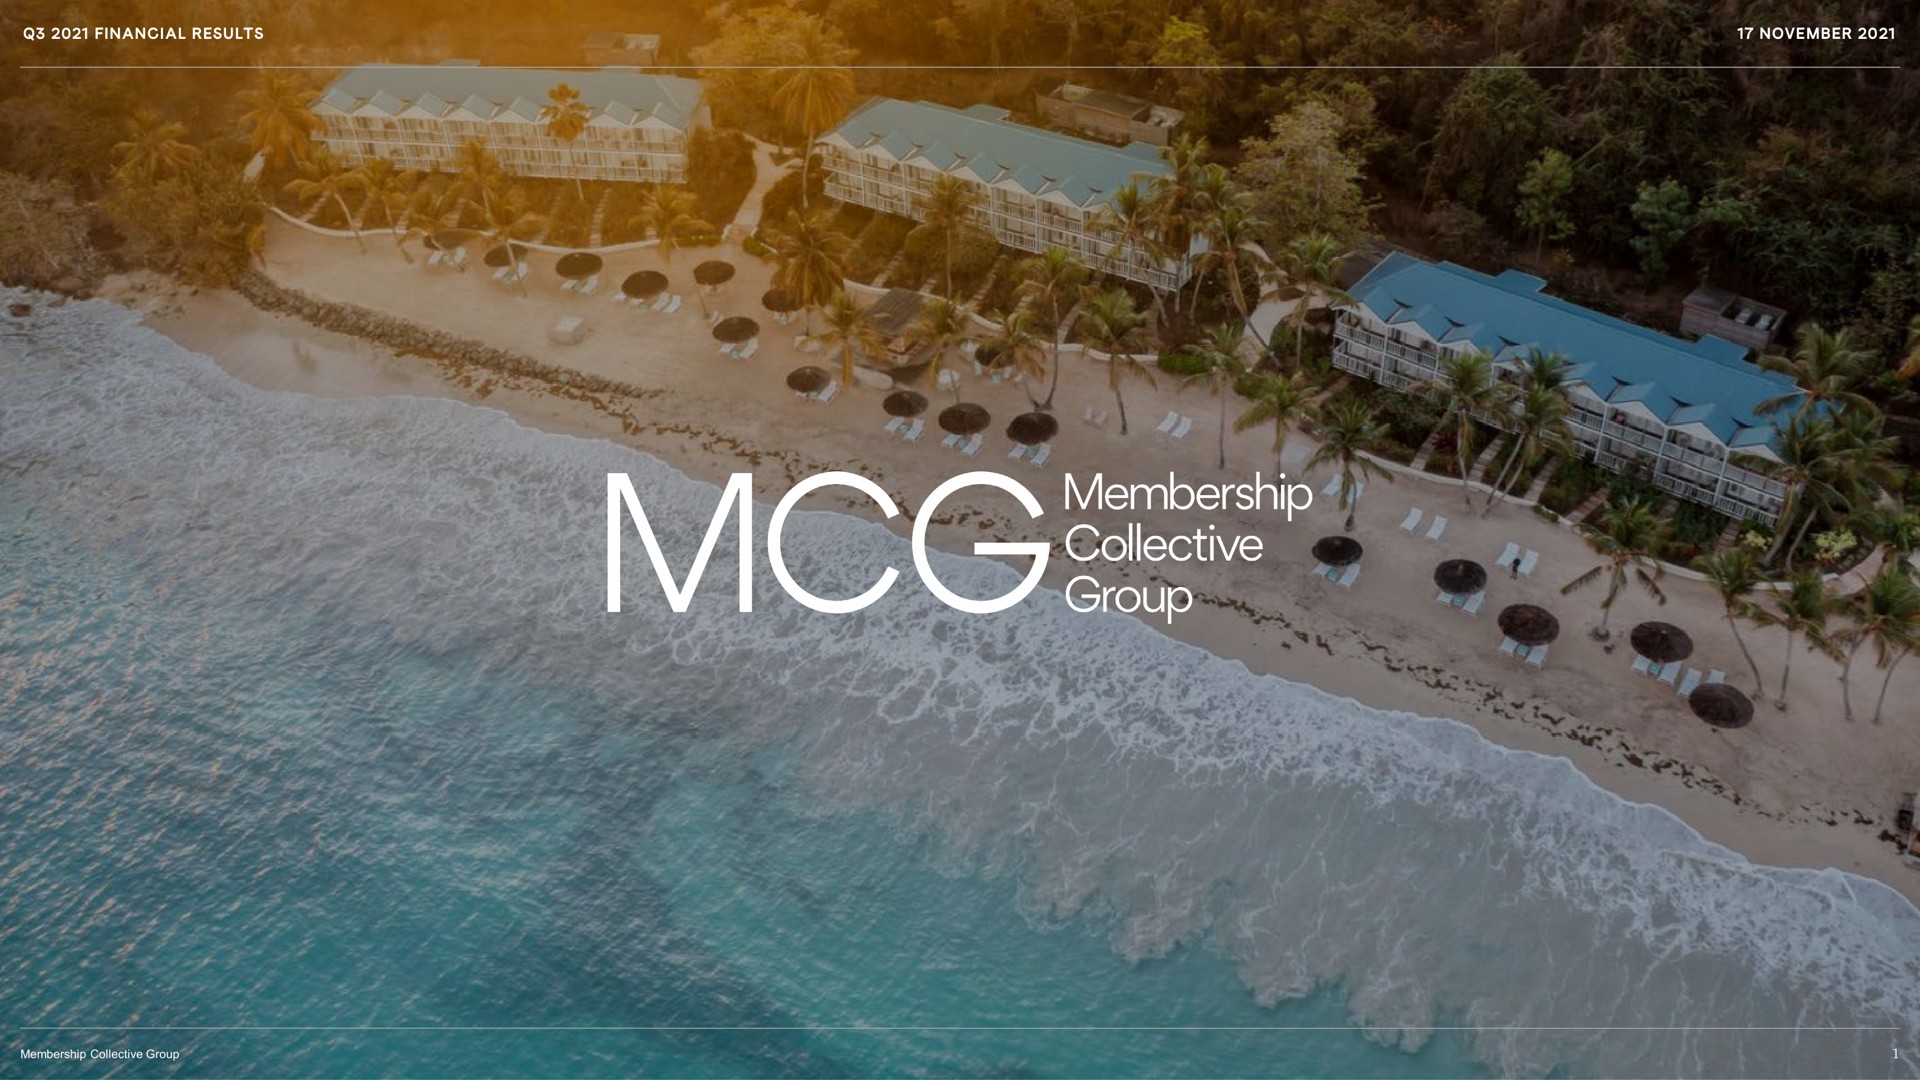  | Membership Collective Group